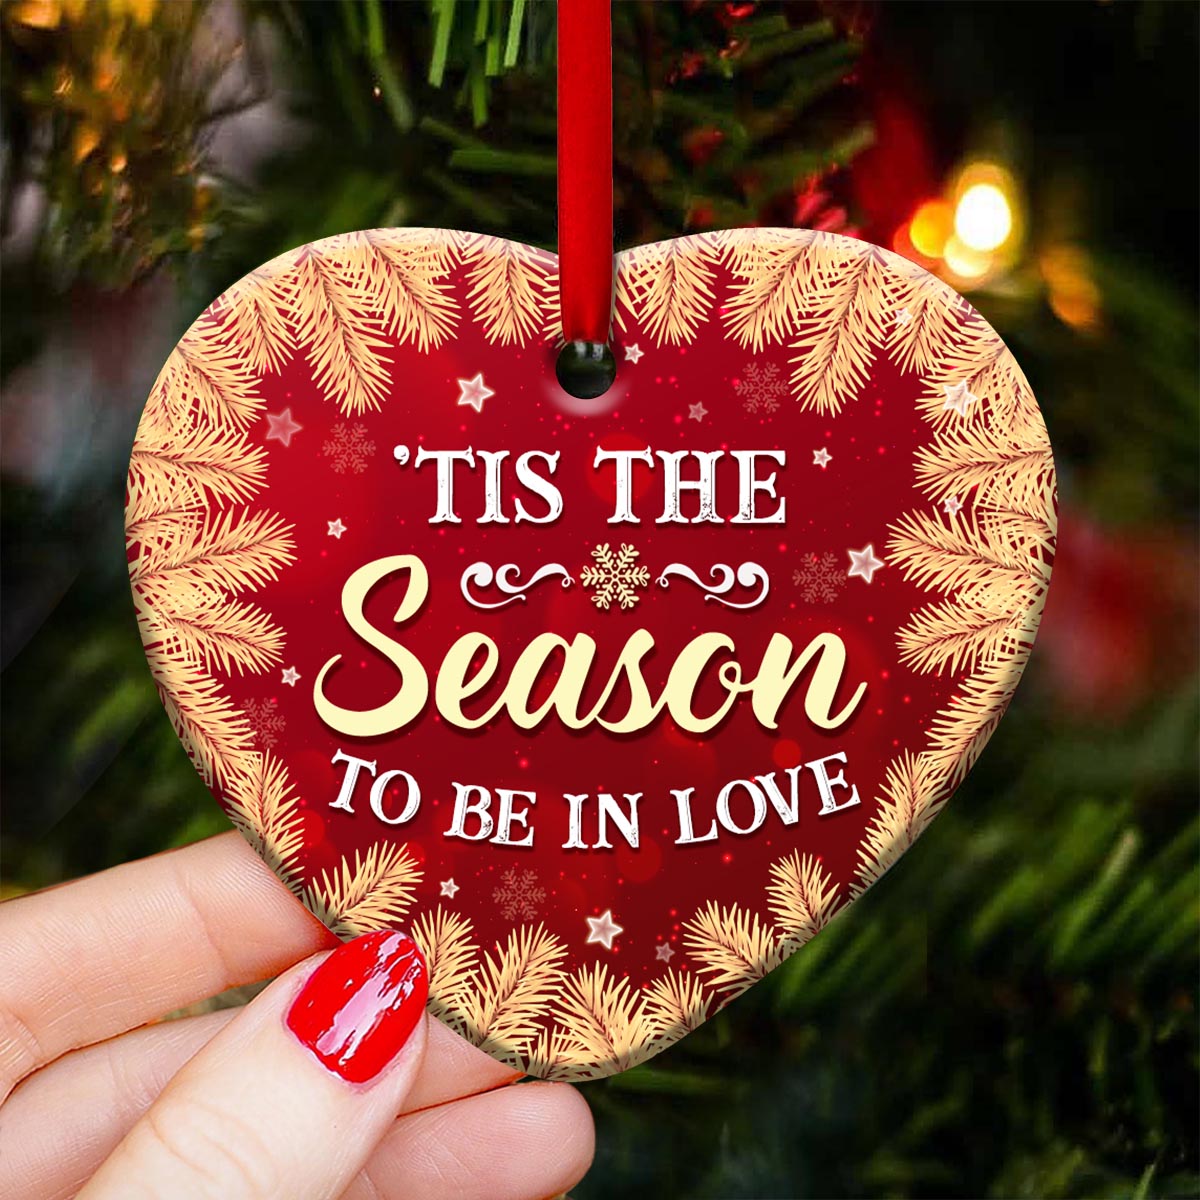 Christmas Gift Tis The Season To Be In Love Personalized - Heart Ornament - Owls Matrix LTD